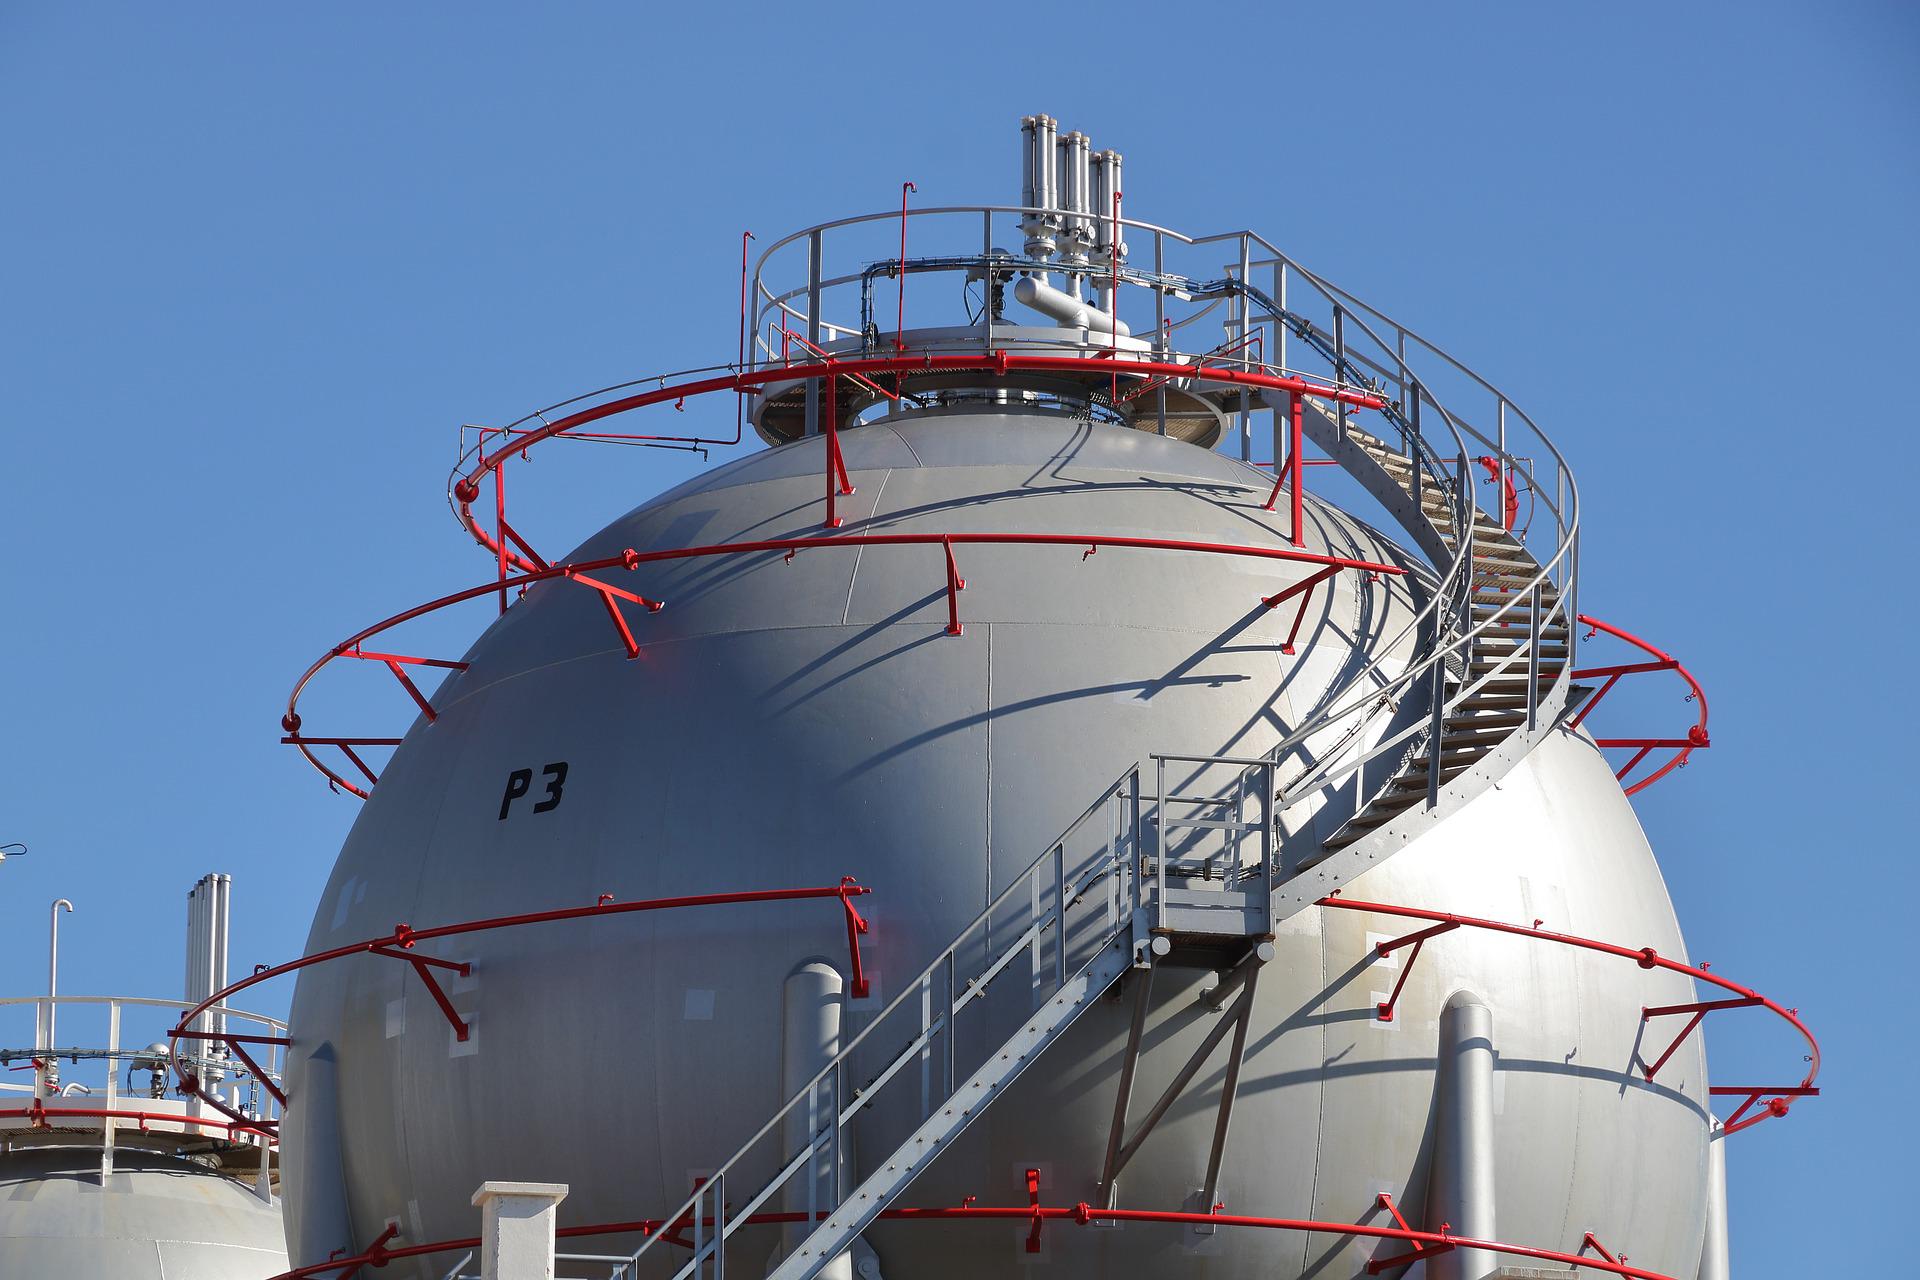 Cheniere signs LNG deal with PetroChina